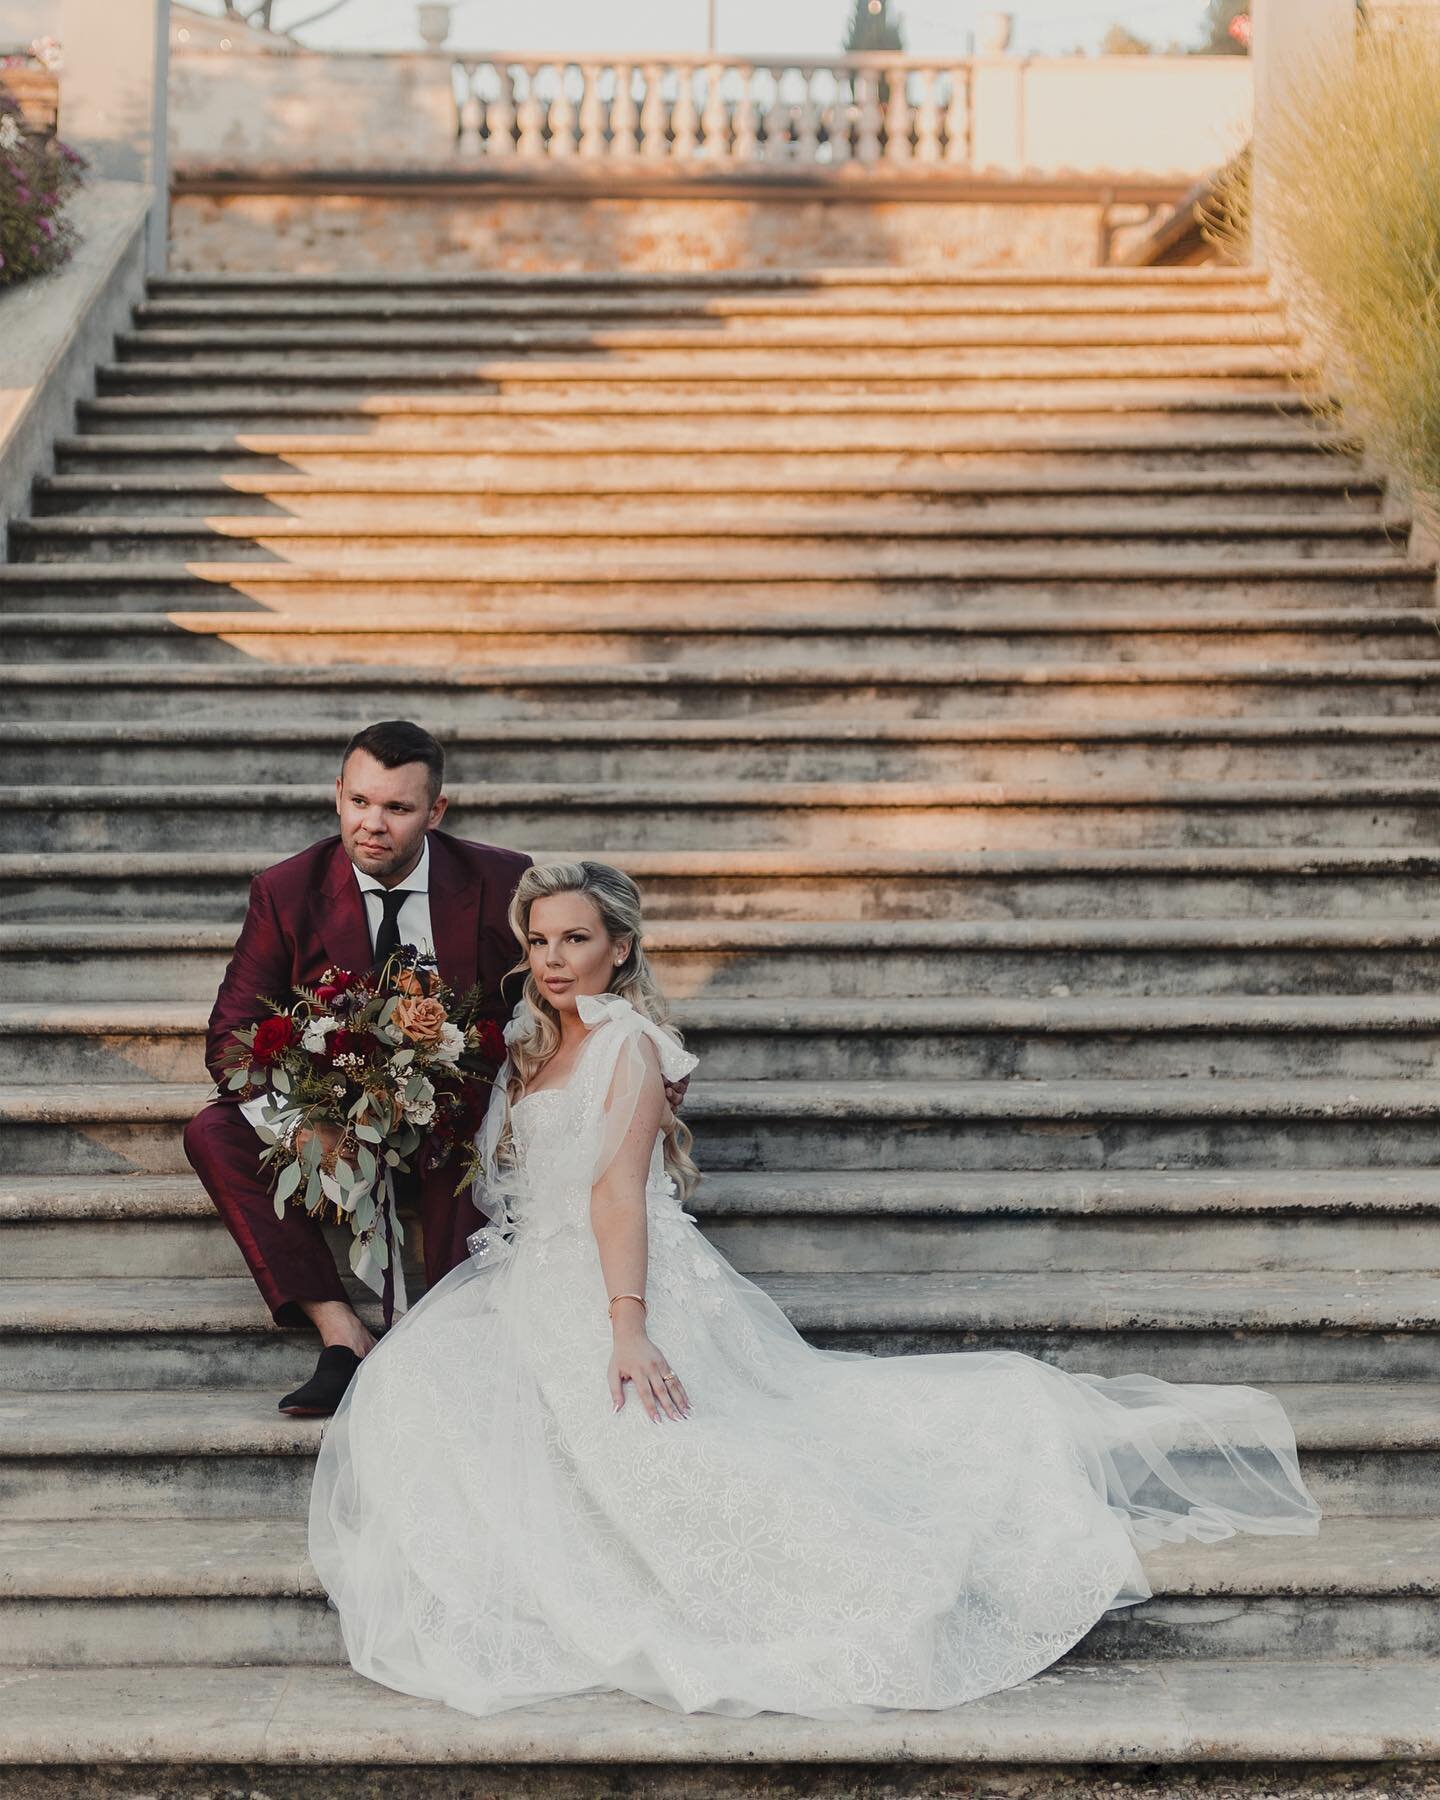 Even the stairs in Italy are magical✨

Dress: @Berta @MuseByBerta
Shoes: @Louboutinworld

Venue: @villalaselva
Wedding Planner: @tuscandream_weddings
&bull;
&bull;
&bull;
&bull;
&bull;
&bull;
&bull;
&bull;
&bull;
&bull;
#theweddingbliss #vancouverwed